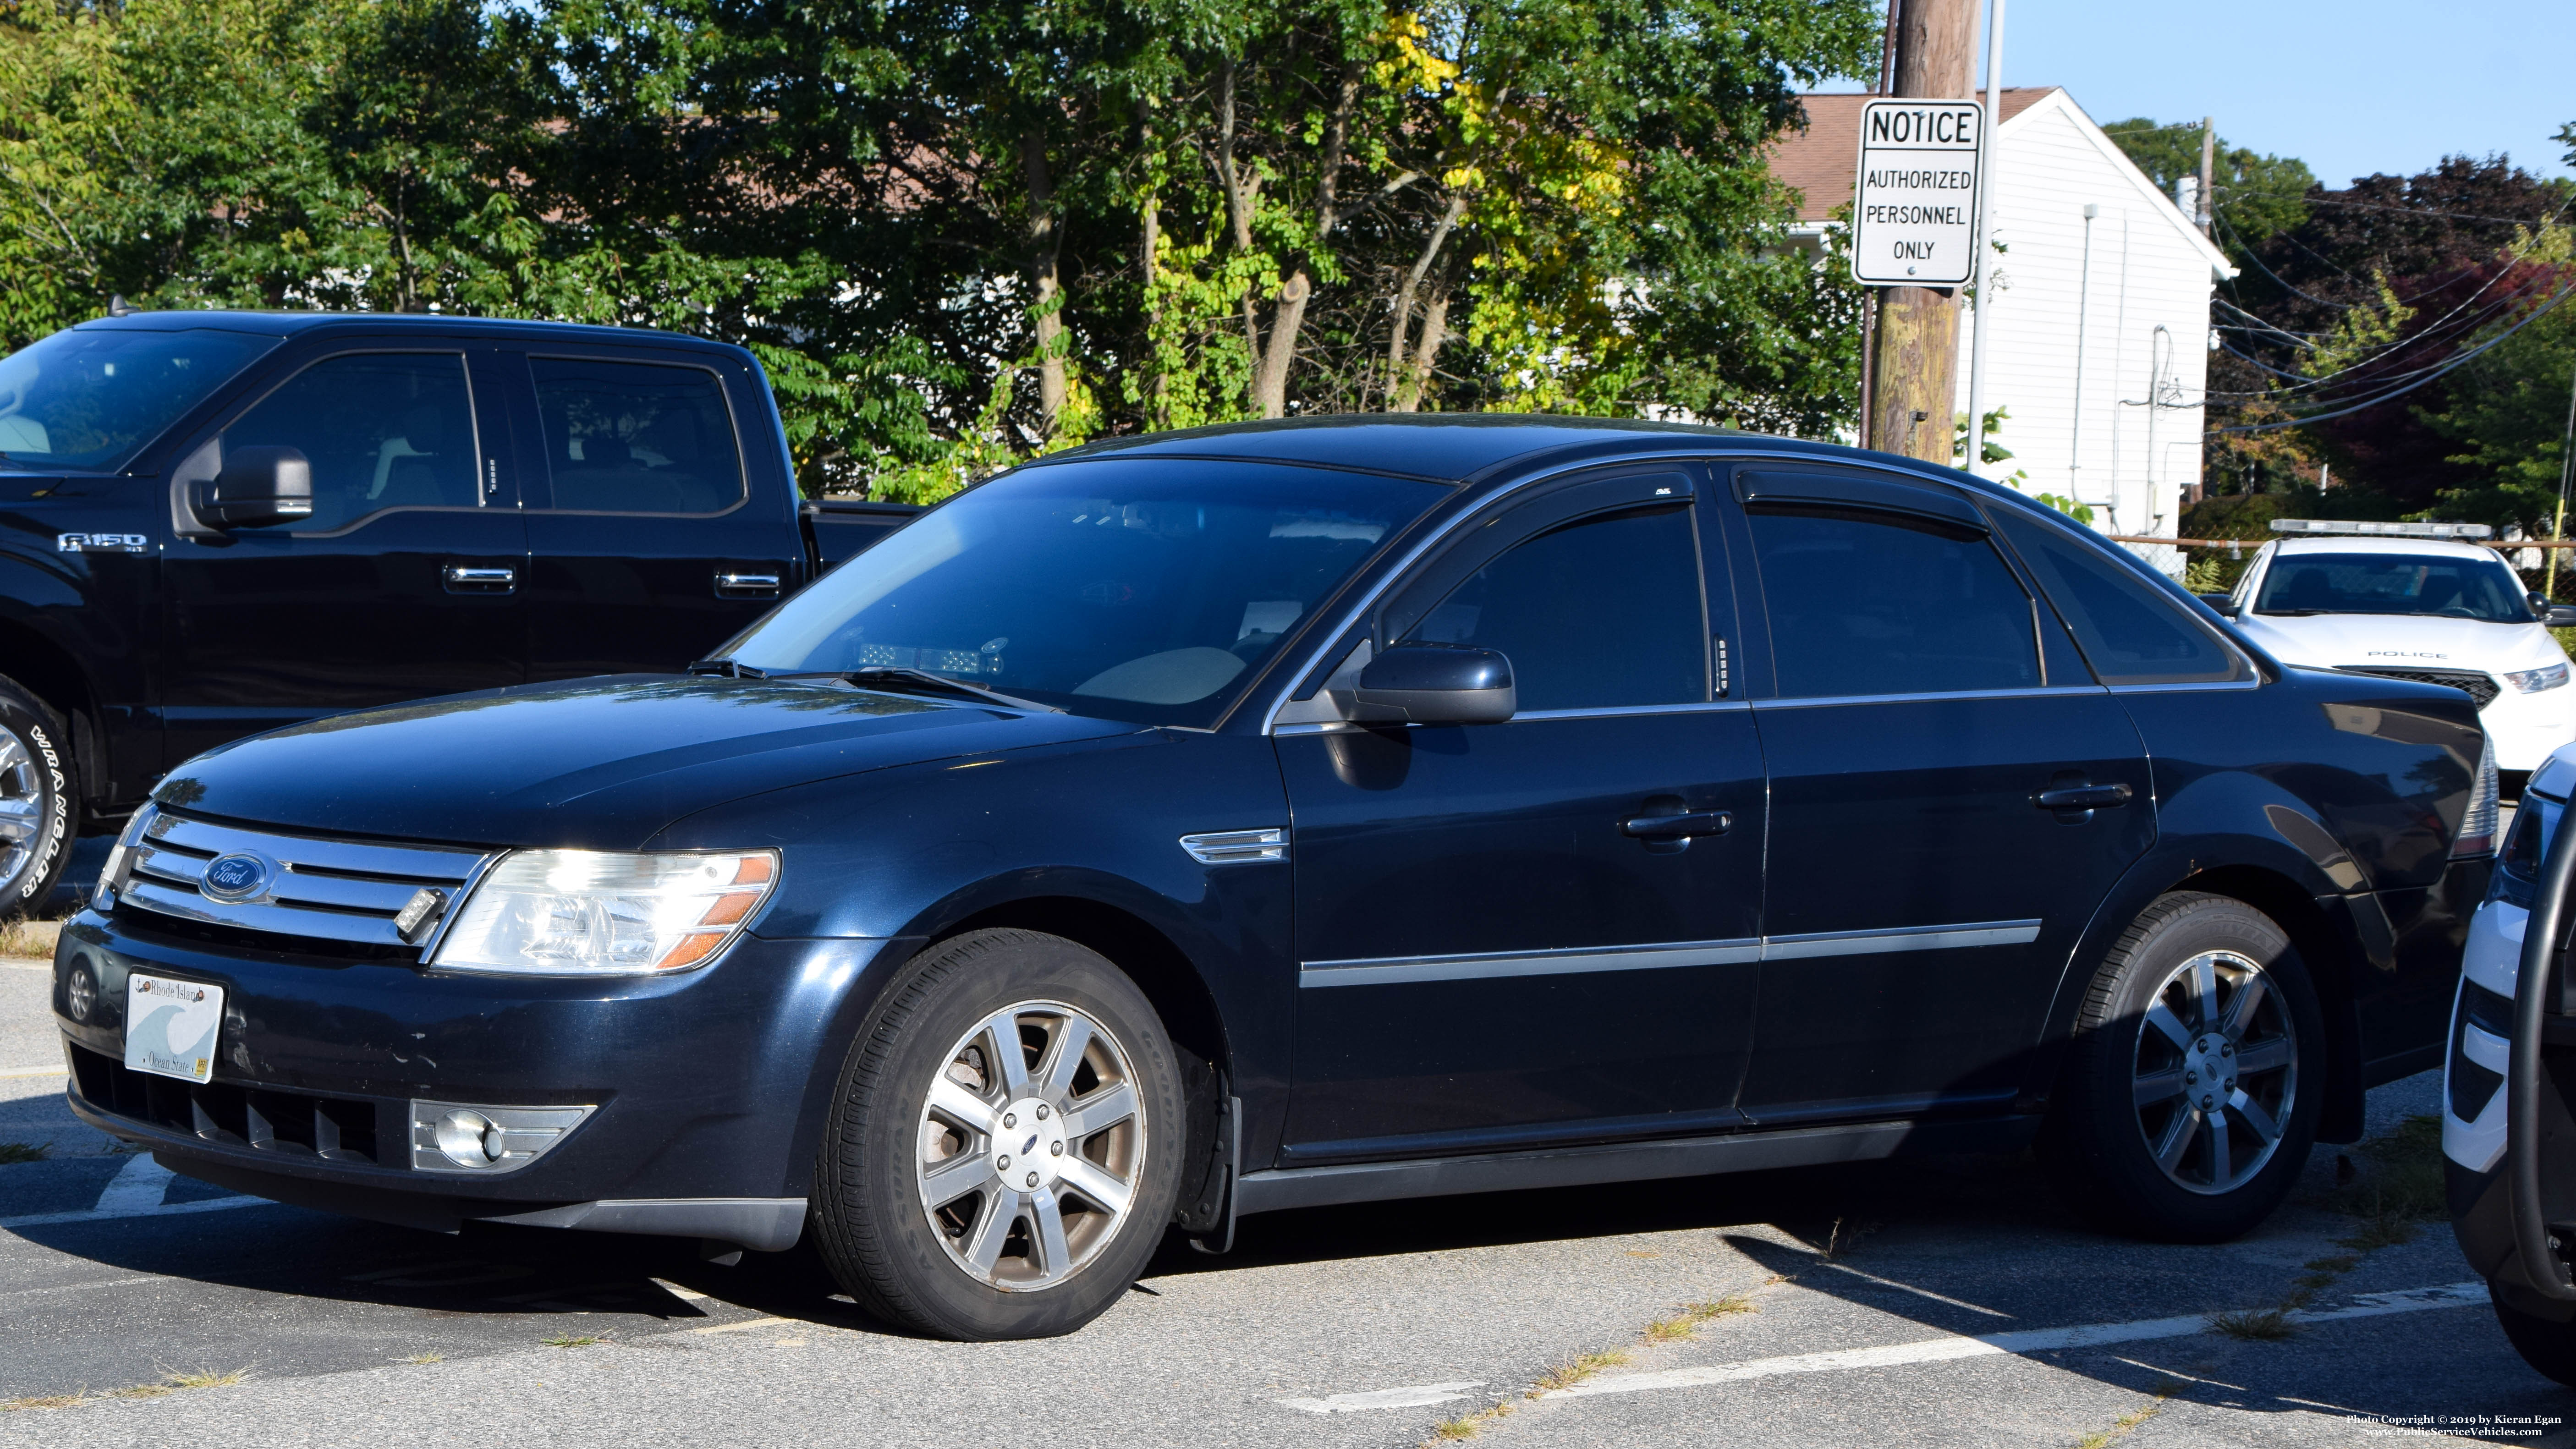 A photo  of North Kingstown Police
            Unmarked Unit, a 2008-2009 Ford Taurus             taken by Kieran Egan